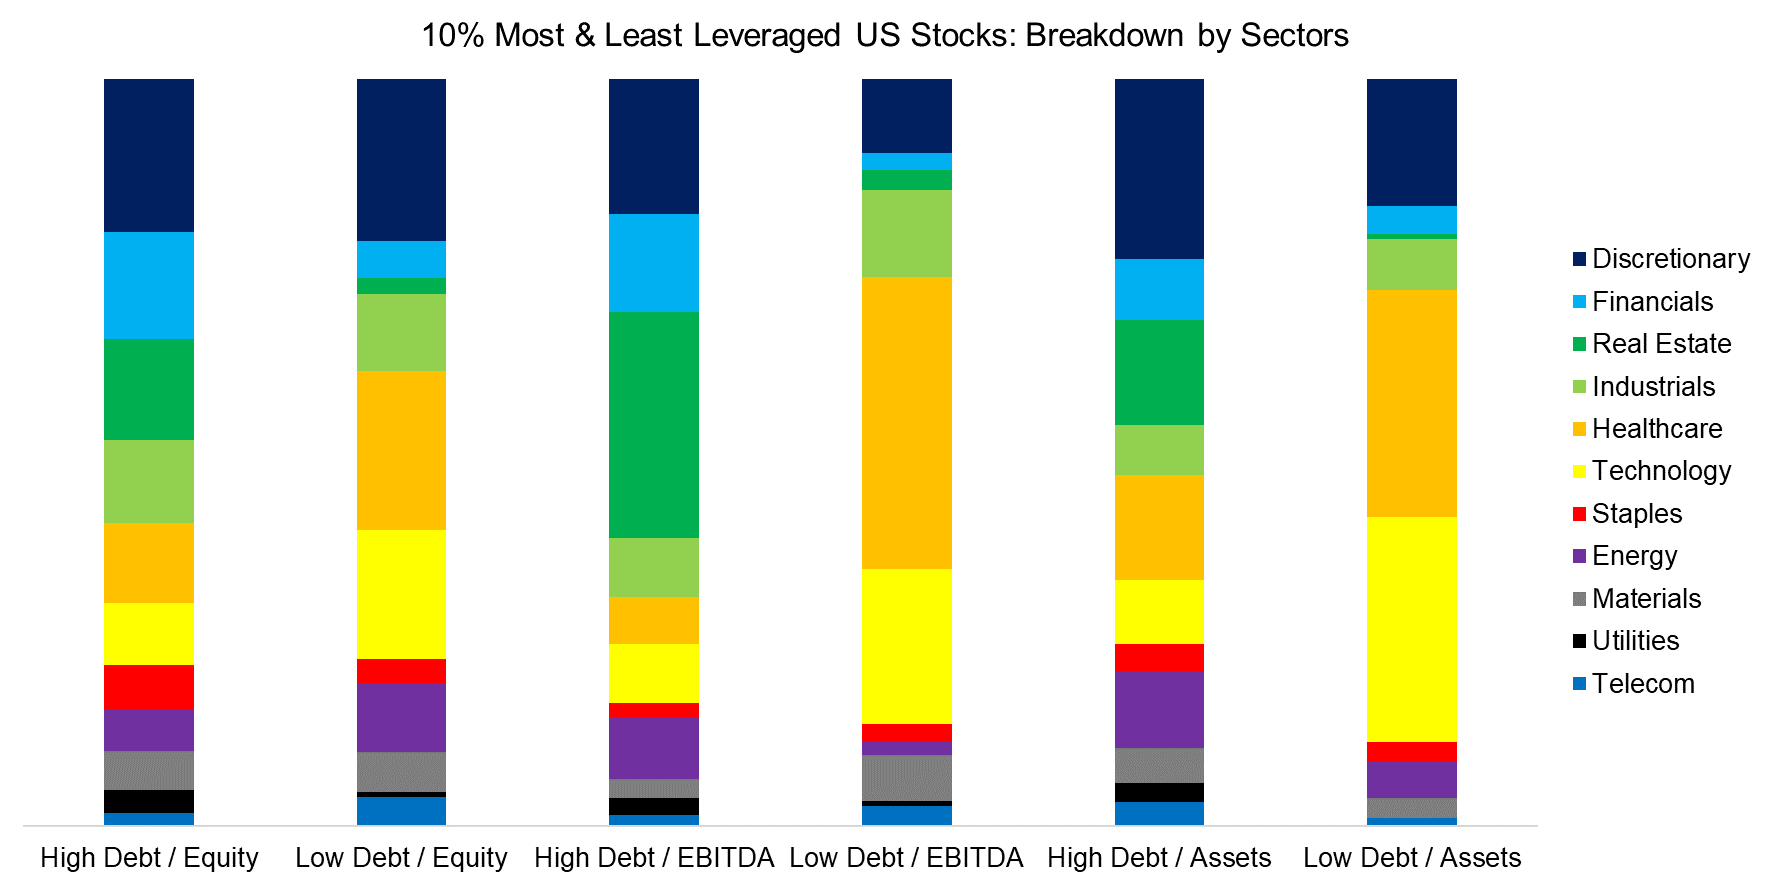 10% Most & Least Leveraged US Stocks Breakdown by Sectors